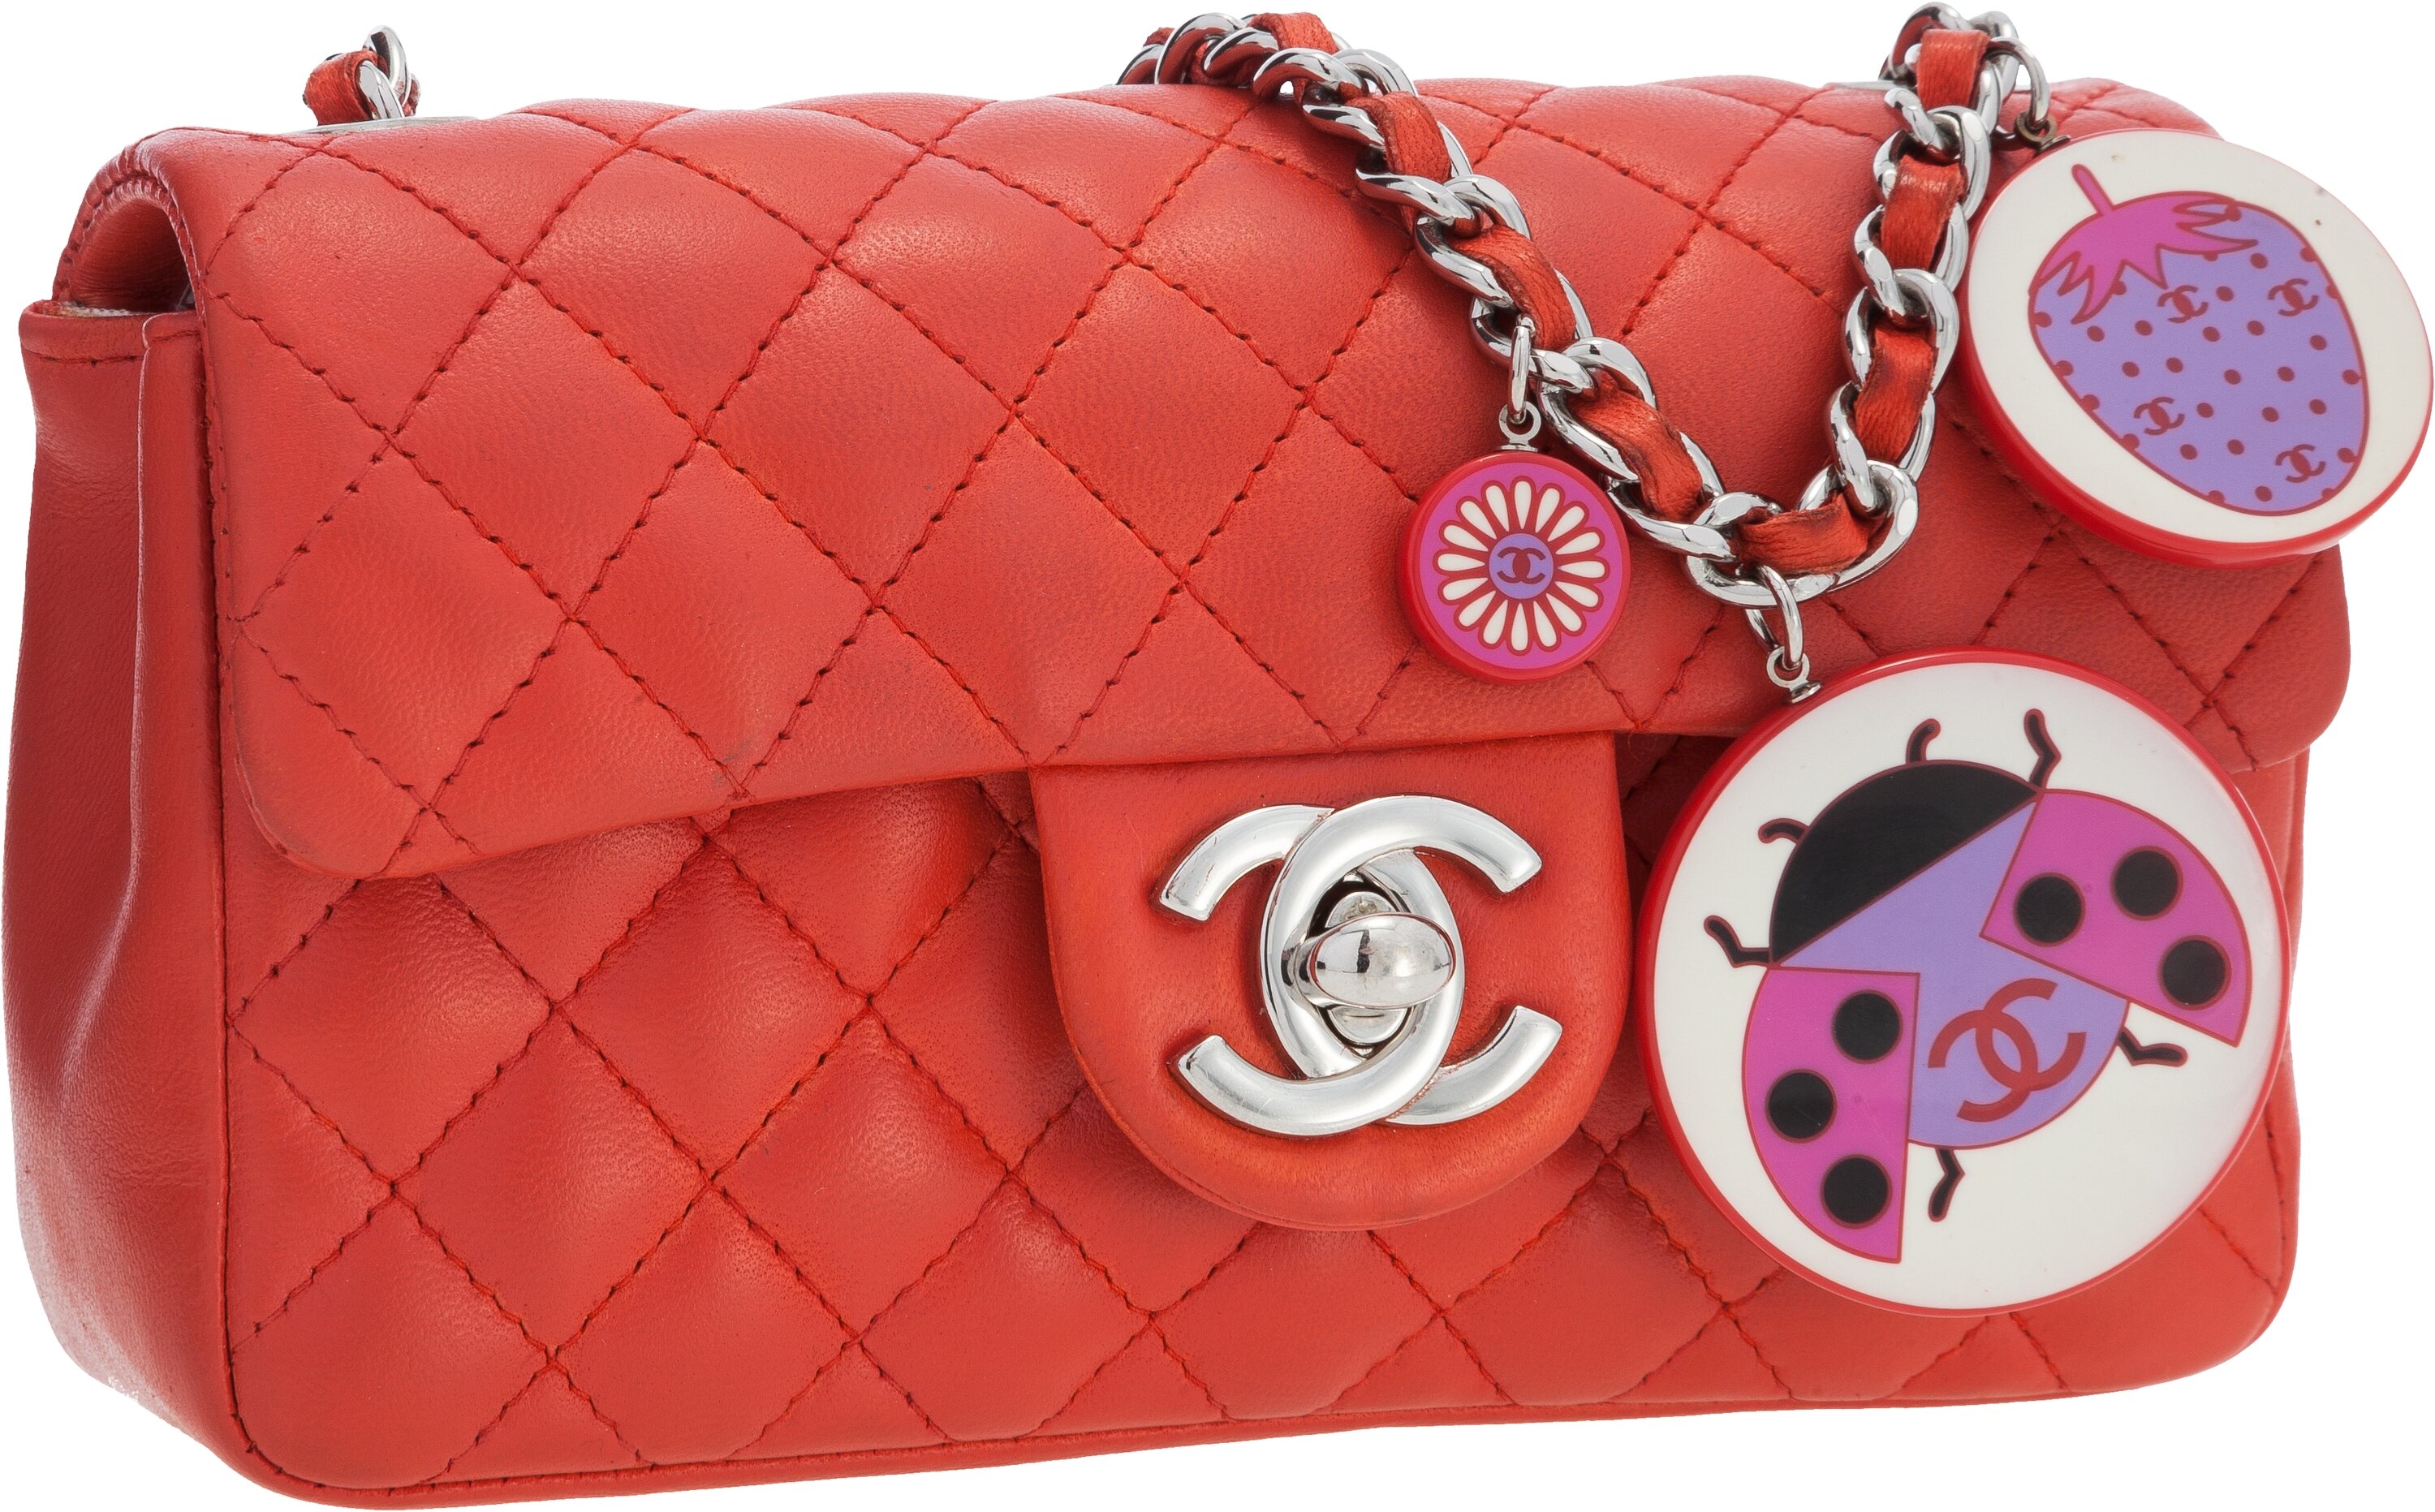 Chanel Limited Edition Red Quilted Lambskin Leather Mini Flap Bag